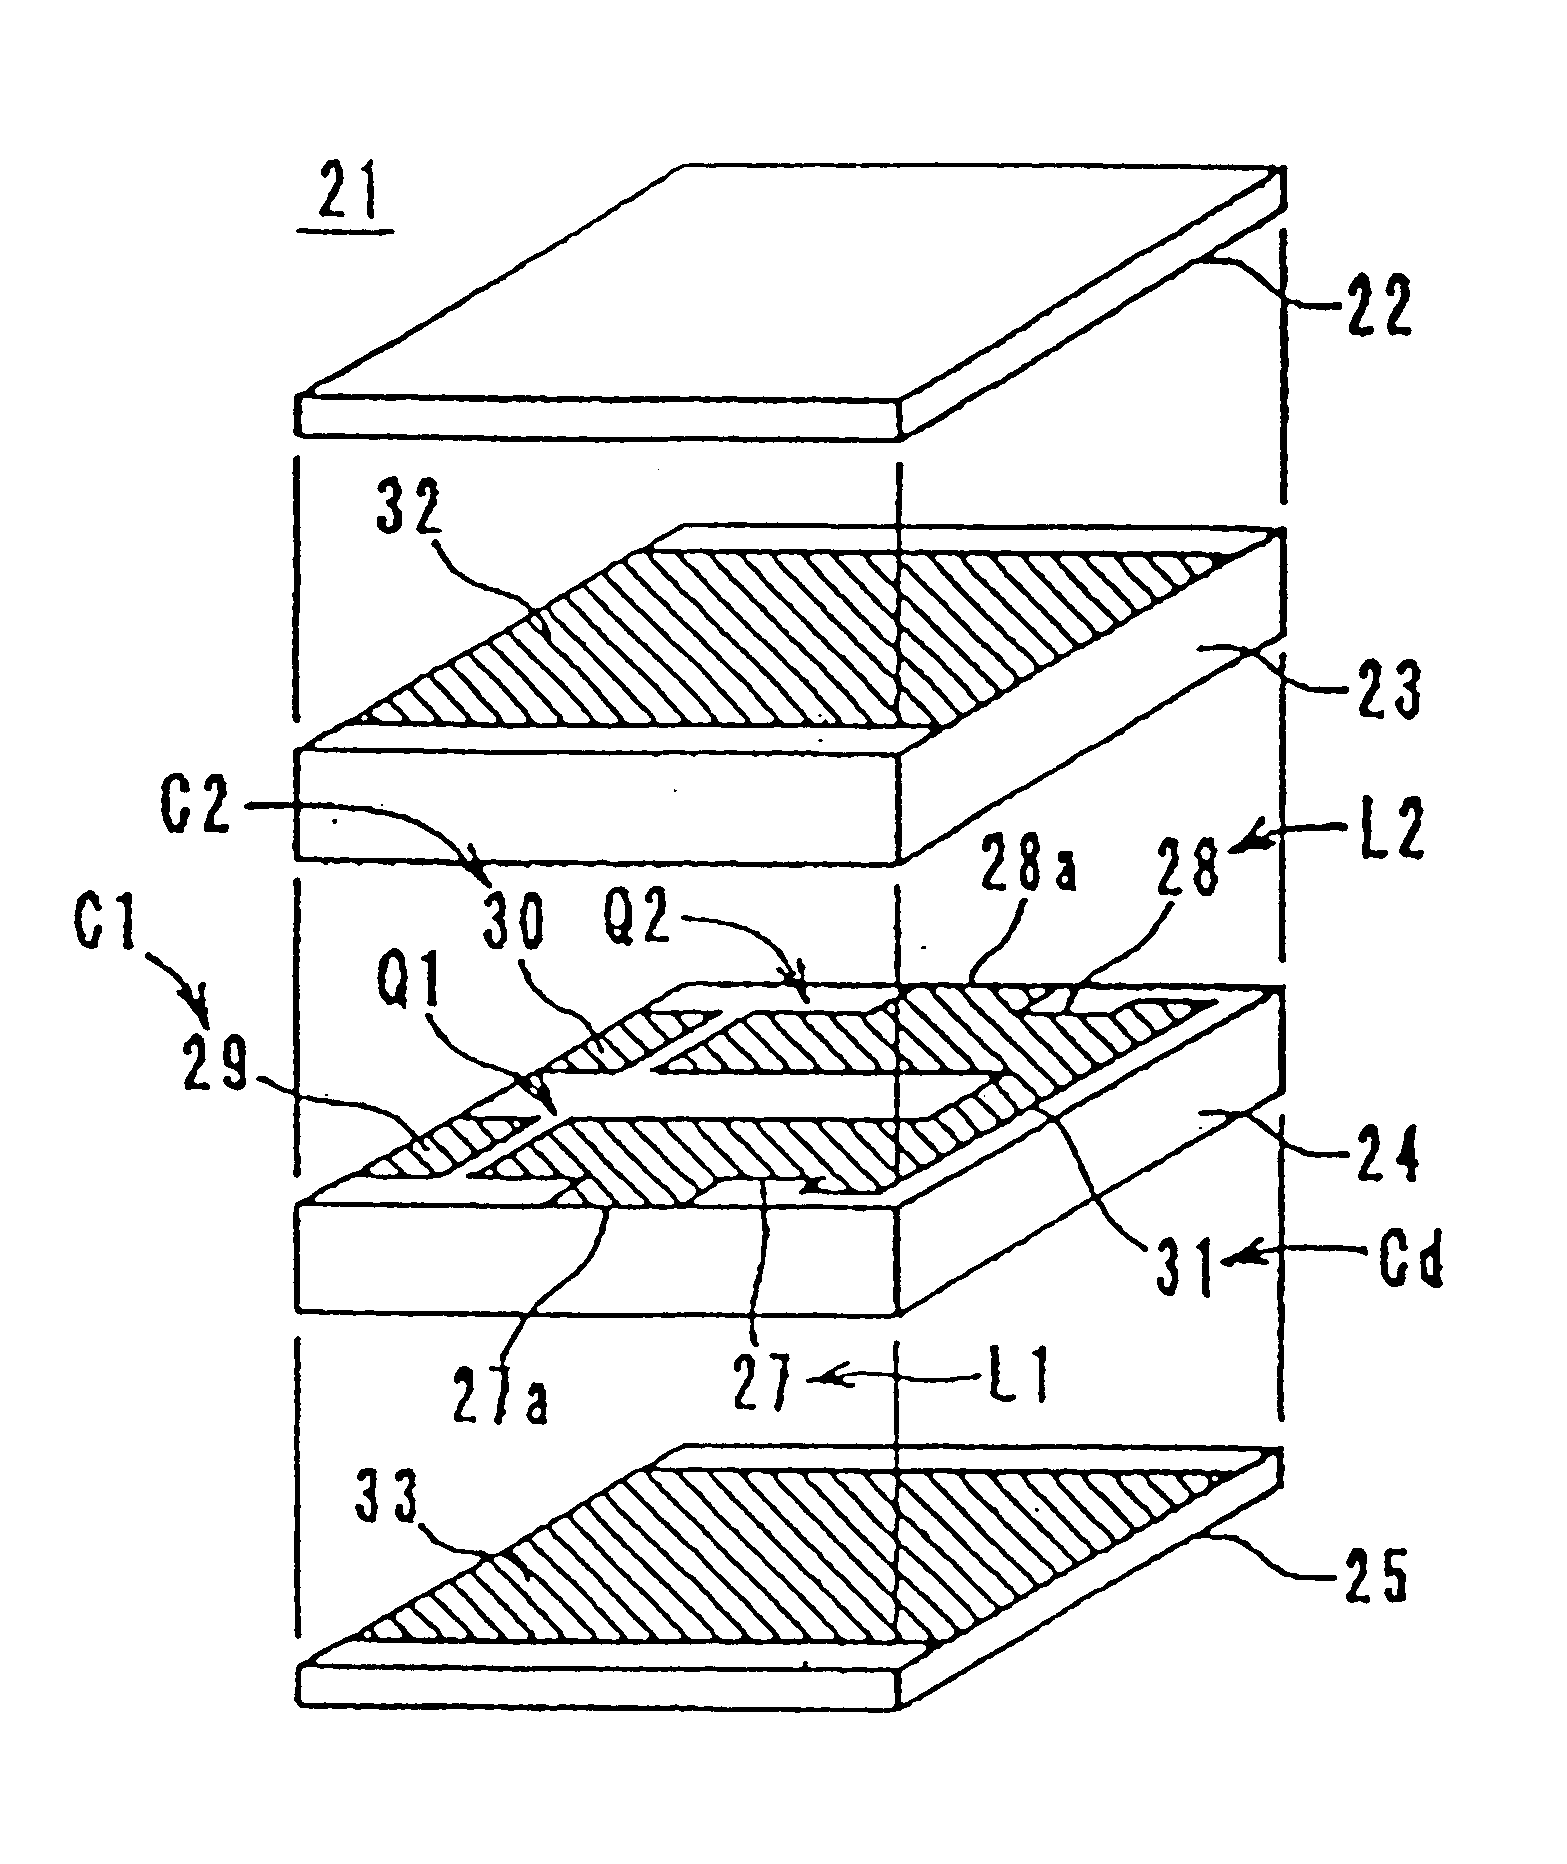 Multi-layered LC composite with a connecting pattern capacitively coupling inductors to ground